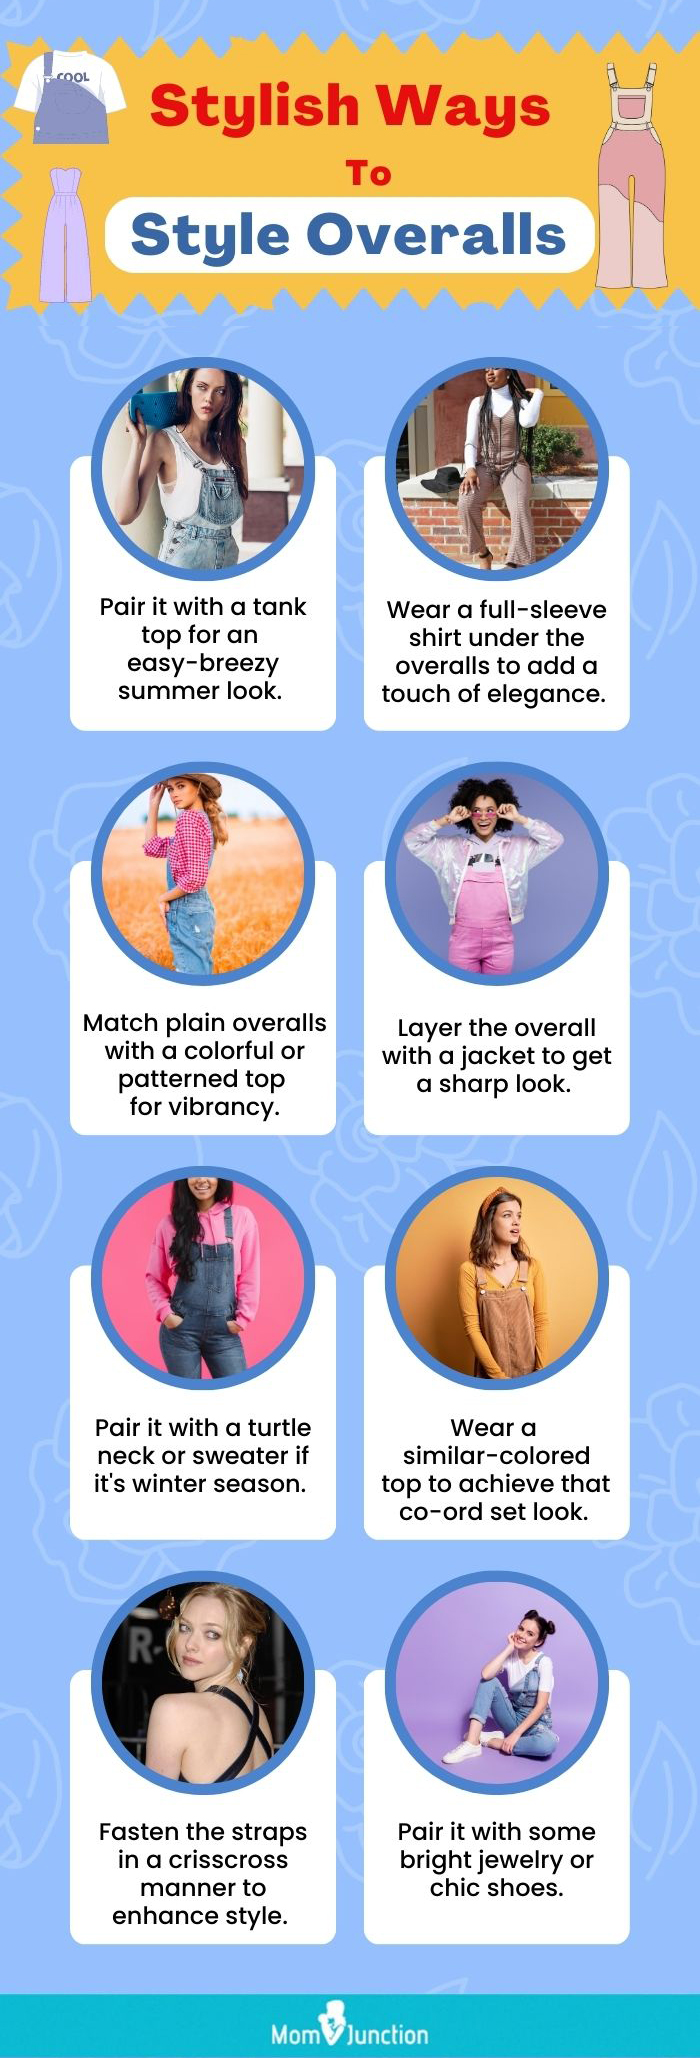 Stylish ways to style overalls (infographic)